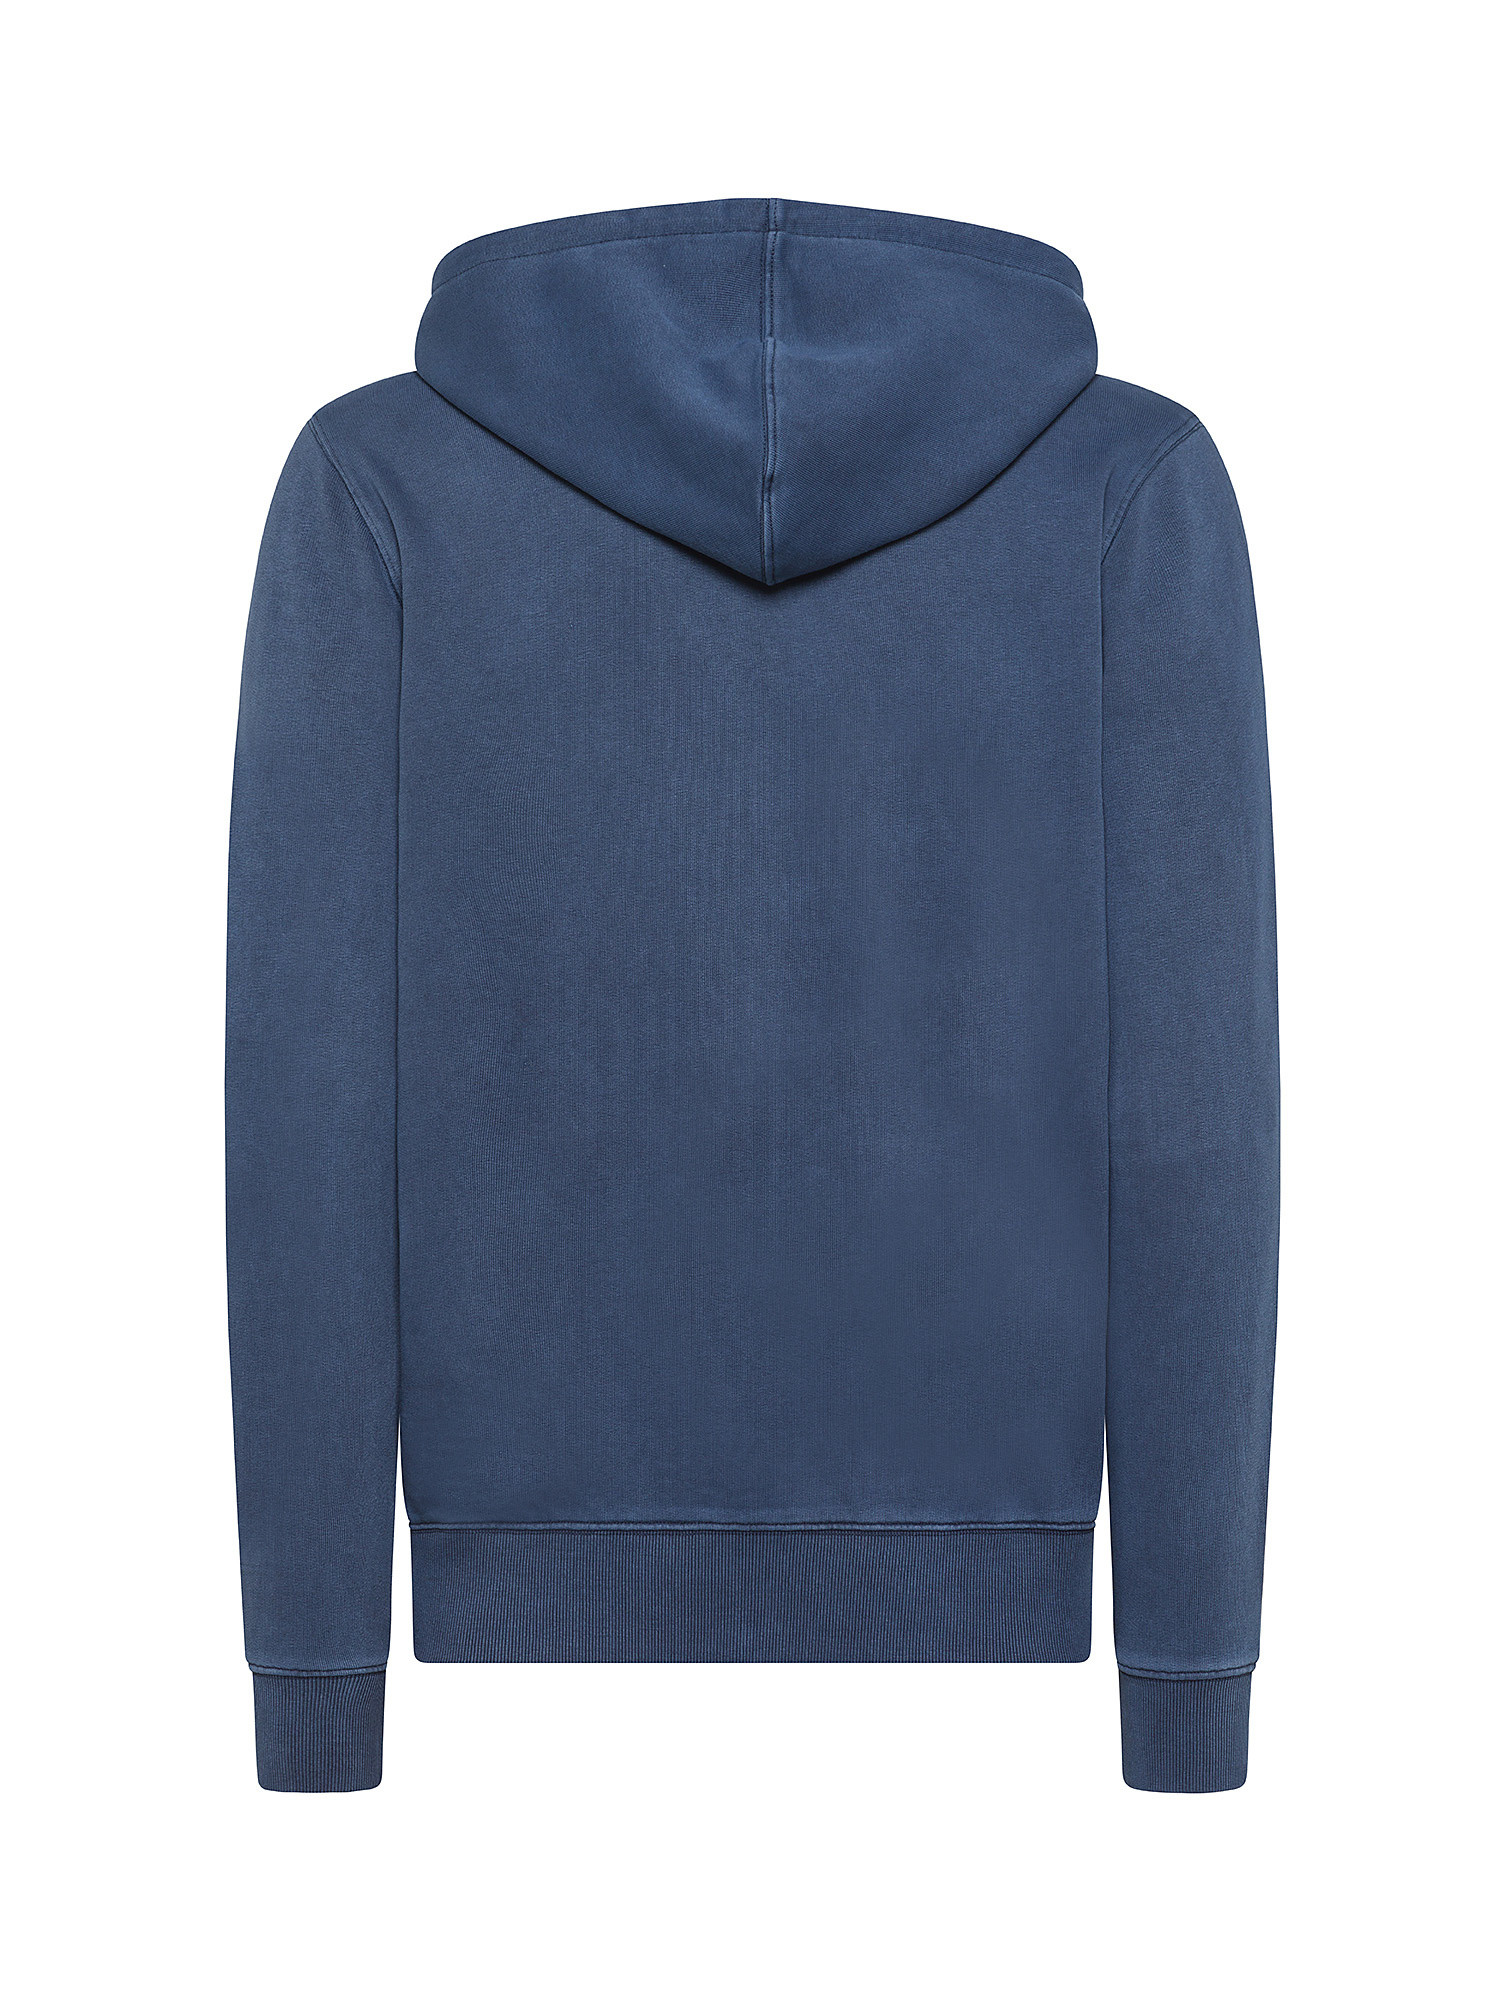 JCT - Pure cotton hooded sweatshirt, Blue, large image number 1